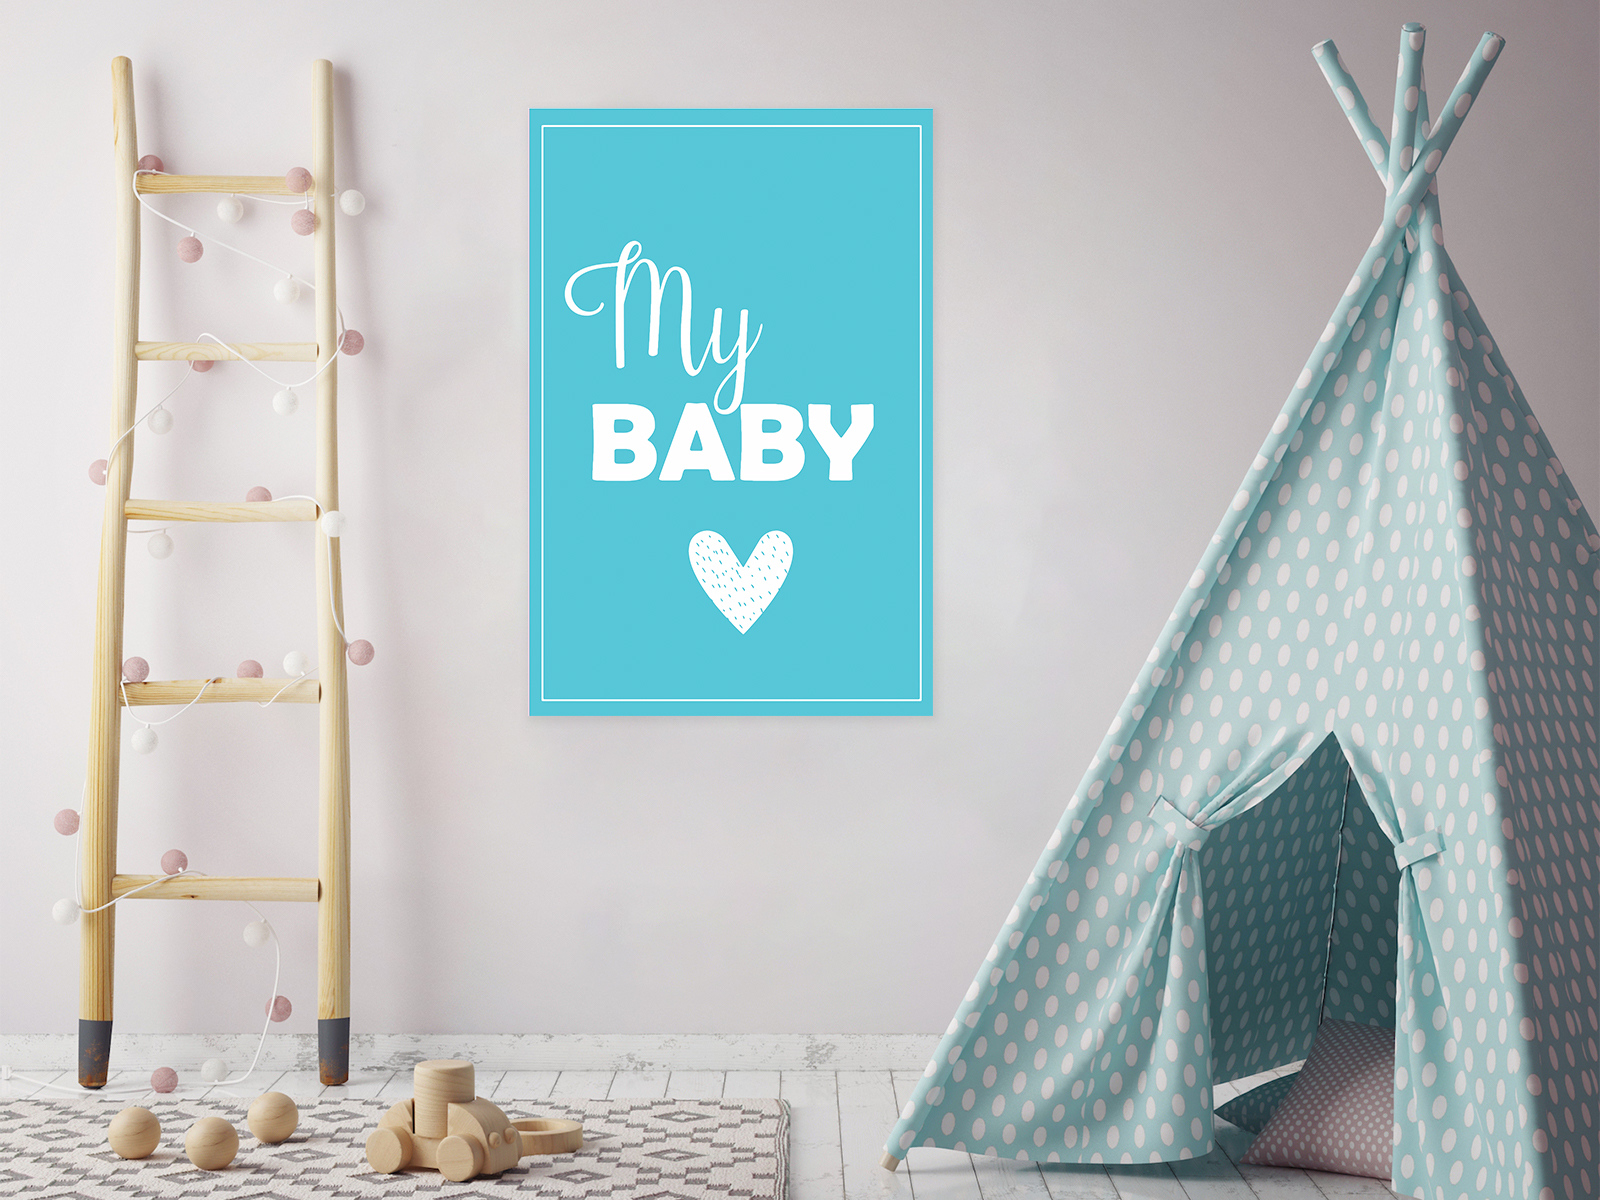 Awkward Styles My Baby Poster Wall Art Kids Room Wall Decor Blue Poster Baby Room Decor Gifts for Kids Baby Boys Room Printed Art Picture Newborn Baby Room Poster Wall Decor Mother Quotes Poster Art - image 2 of 3